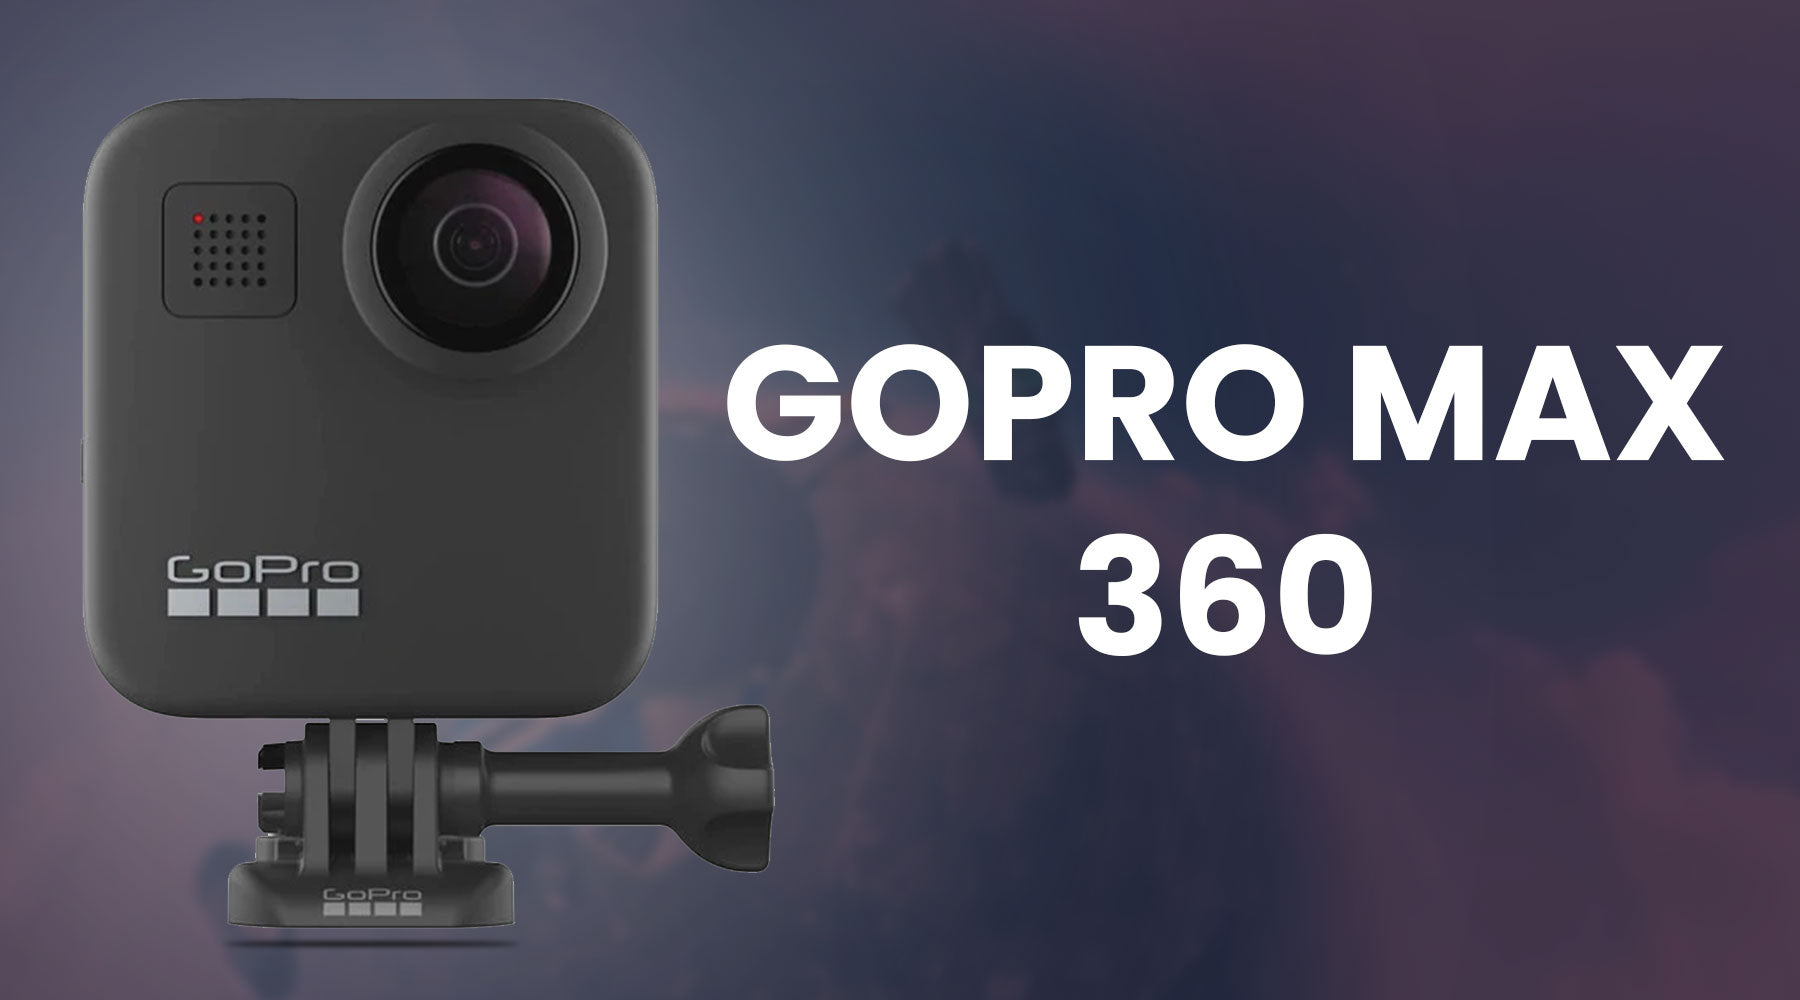 GoPro Max review: Everything an action camera should be